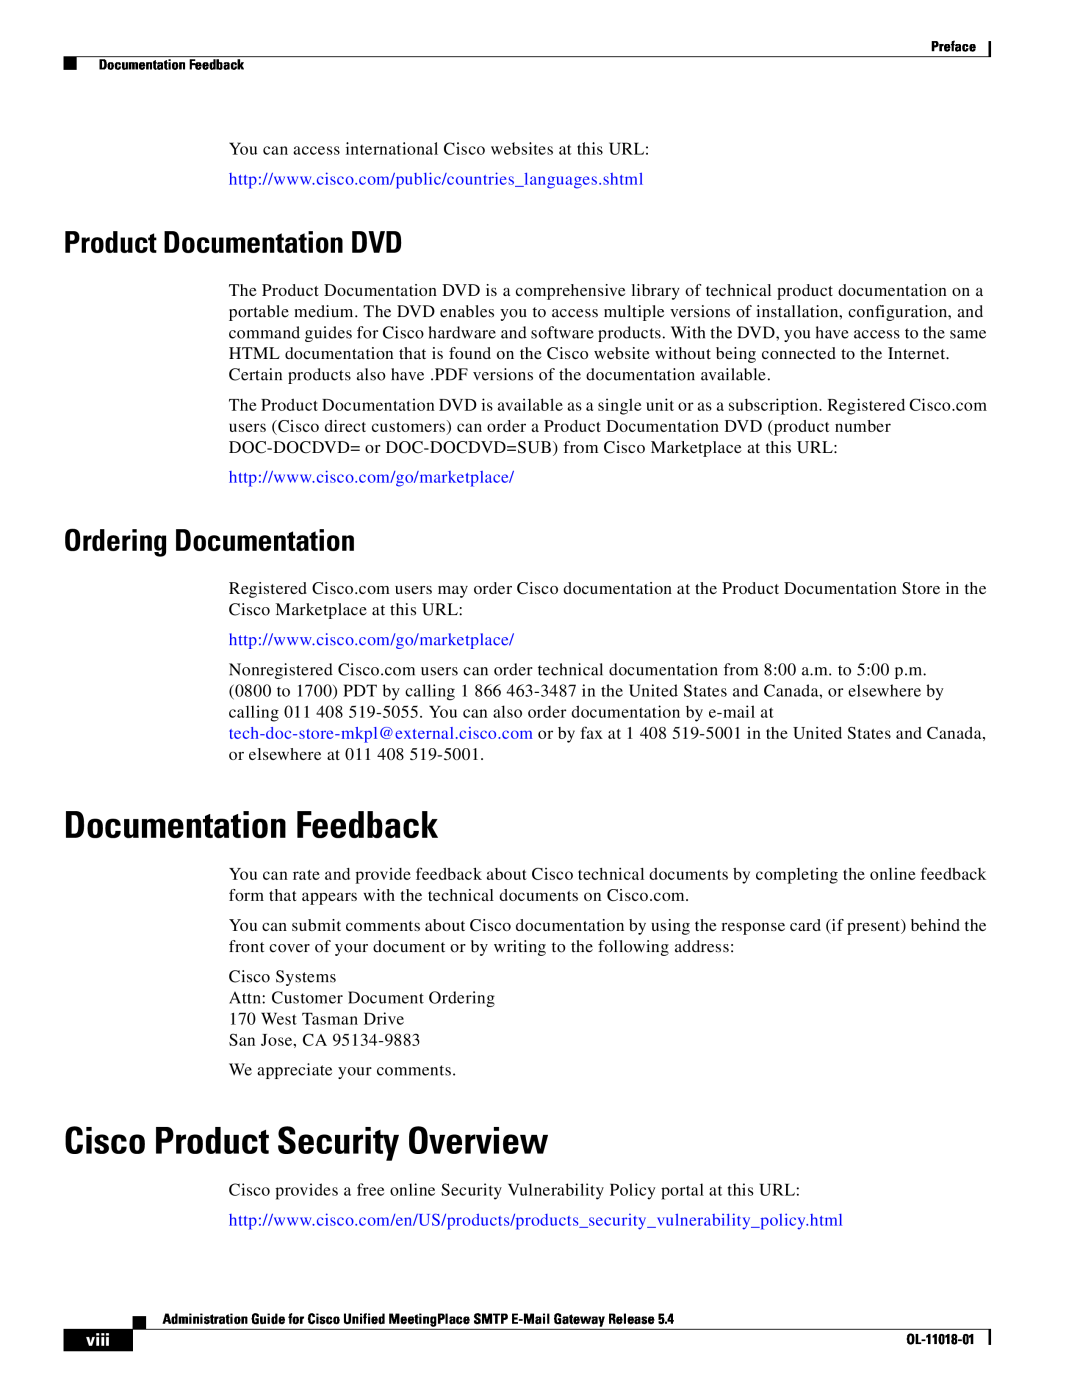 Cisco Systems SMTP manual Documentation Feedback, Cisco Product Security Overview, Product Documentation DVD, viii 